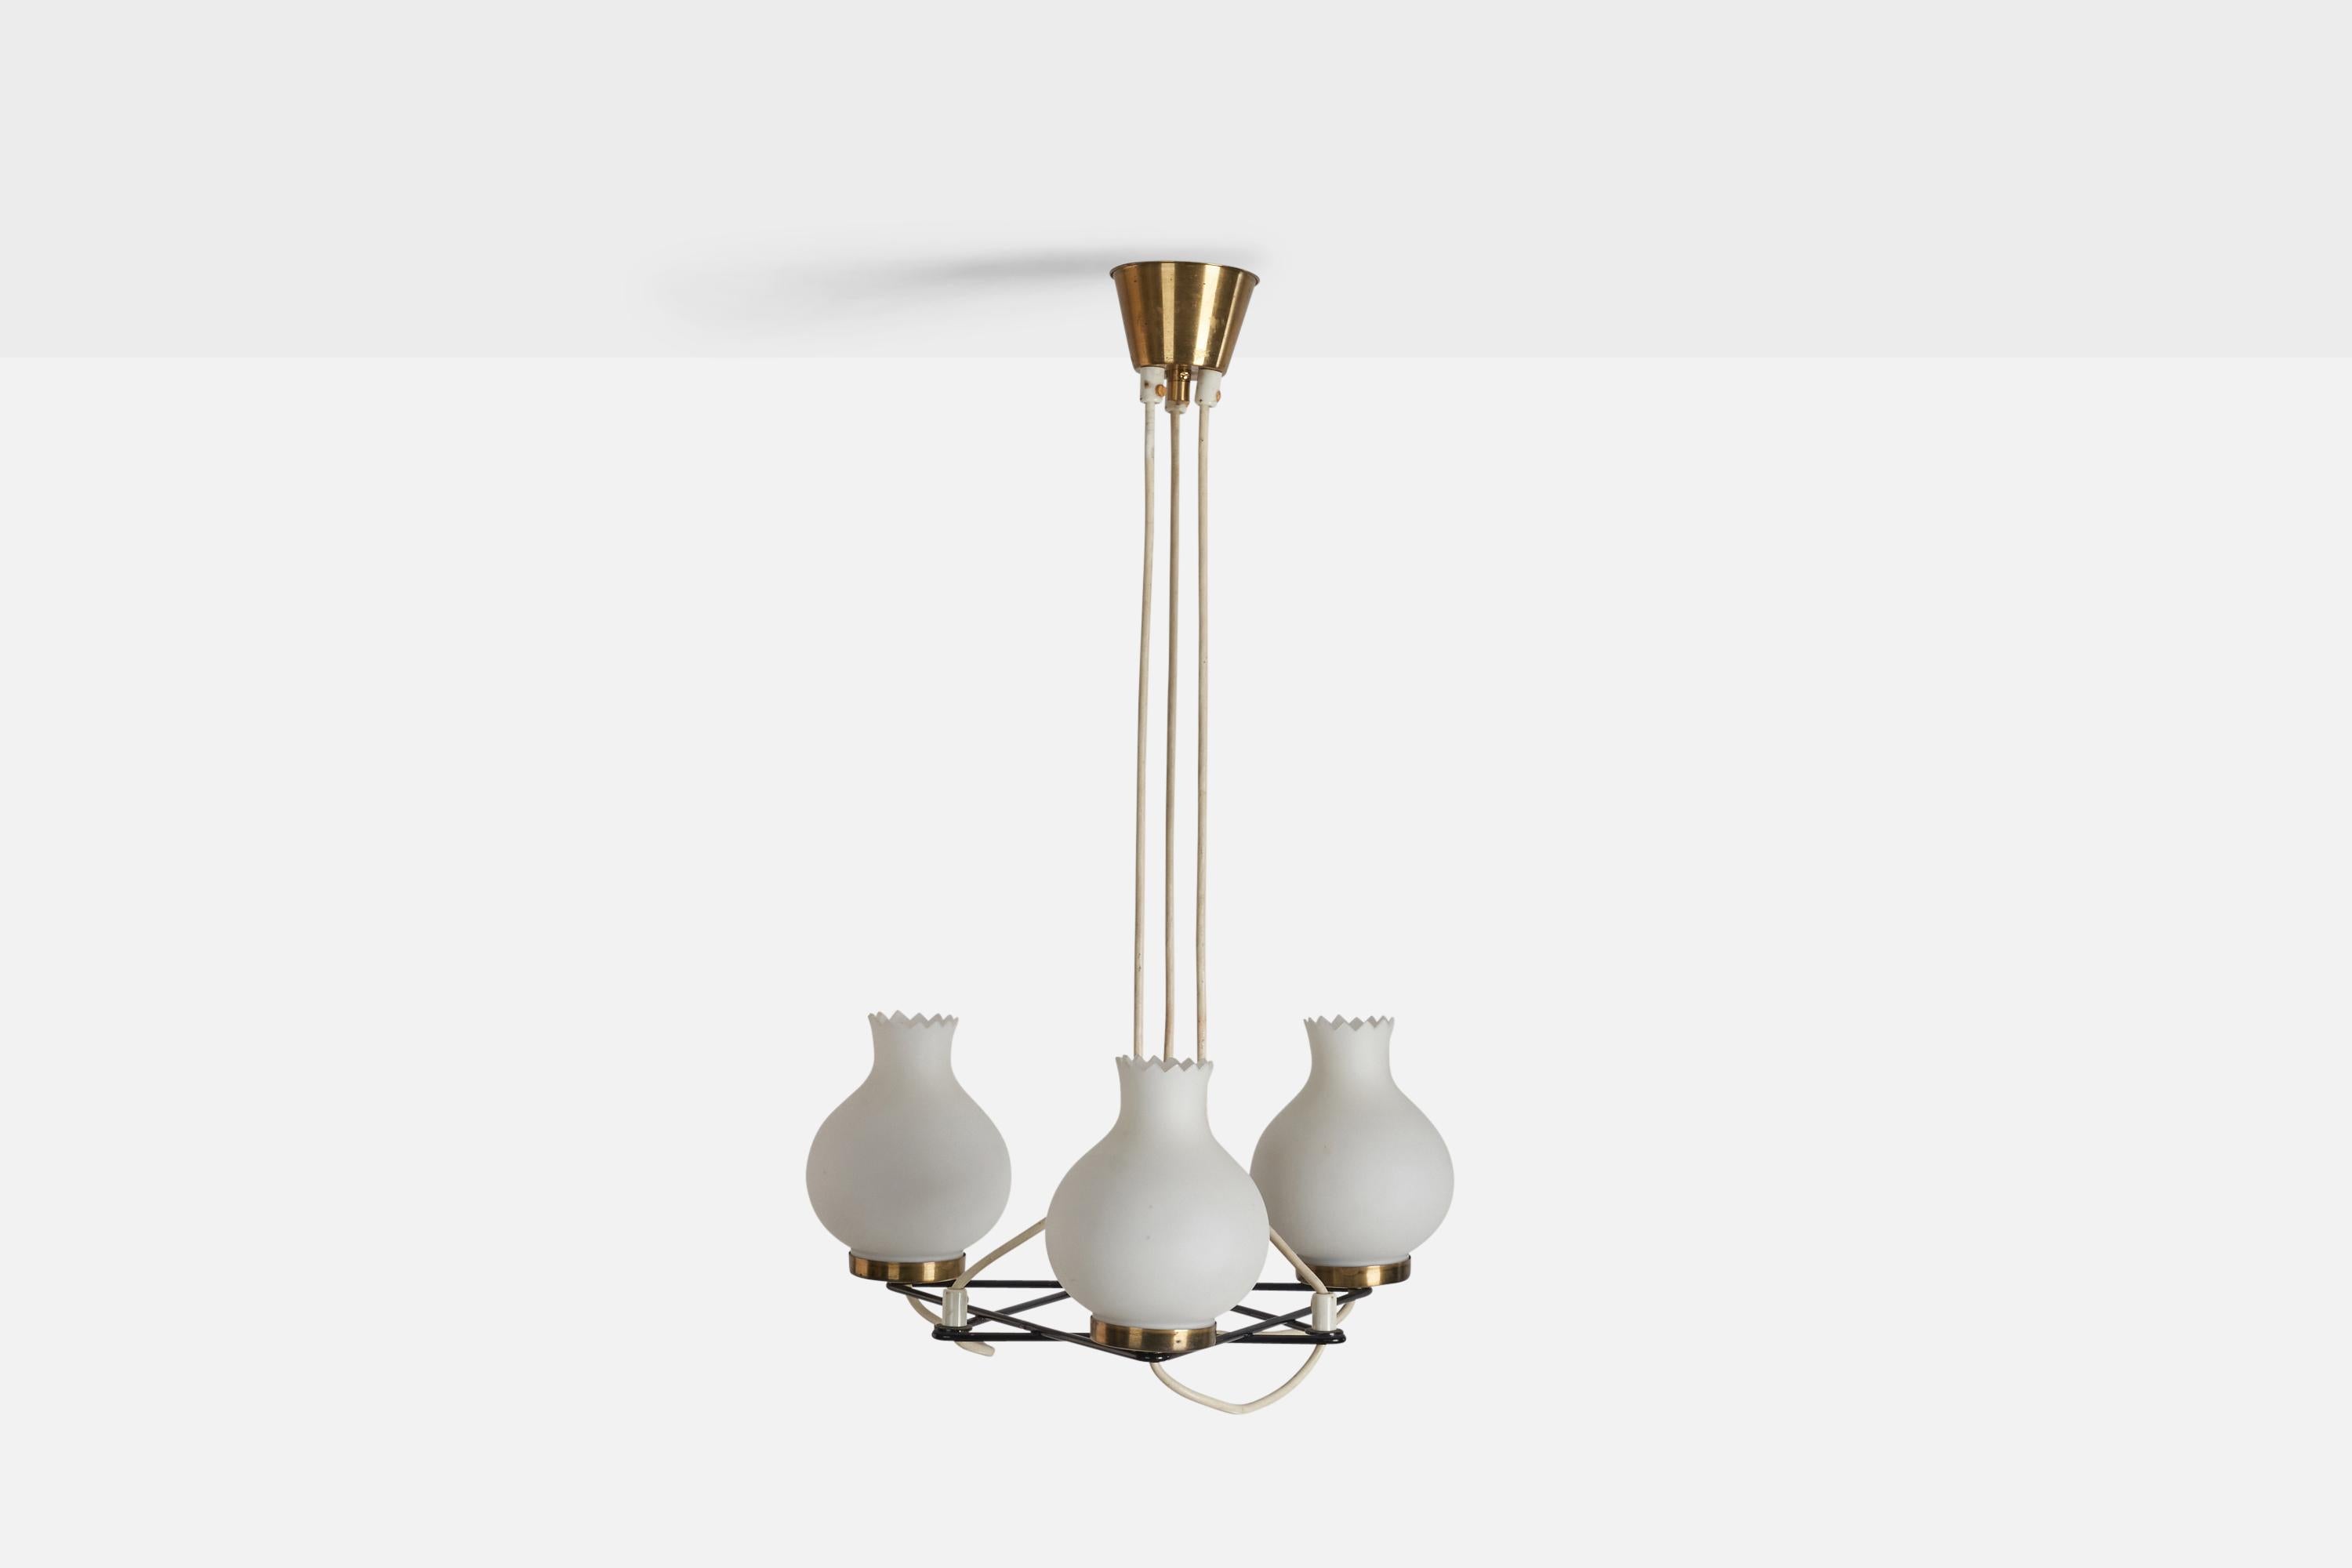 A brass, metal and glass chandelier designed and produced by a Swedish Designer, Sweden, 1950s.

Dimensions of Canopy (inches) : 2.6 x 3.6 x 3.6 (Height x Width x Depth) 

Sockets take standard E-26 medium base bulbs.

There is no maximum